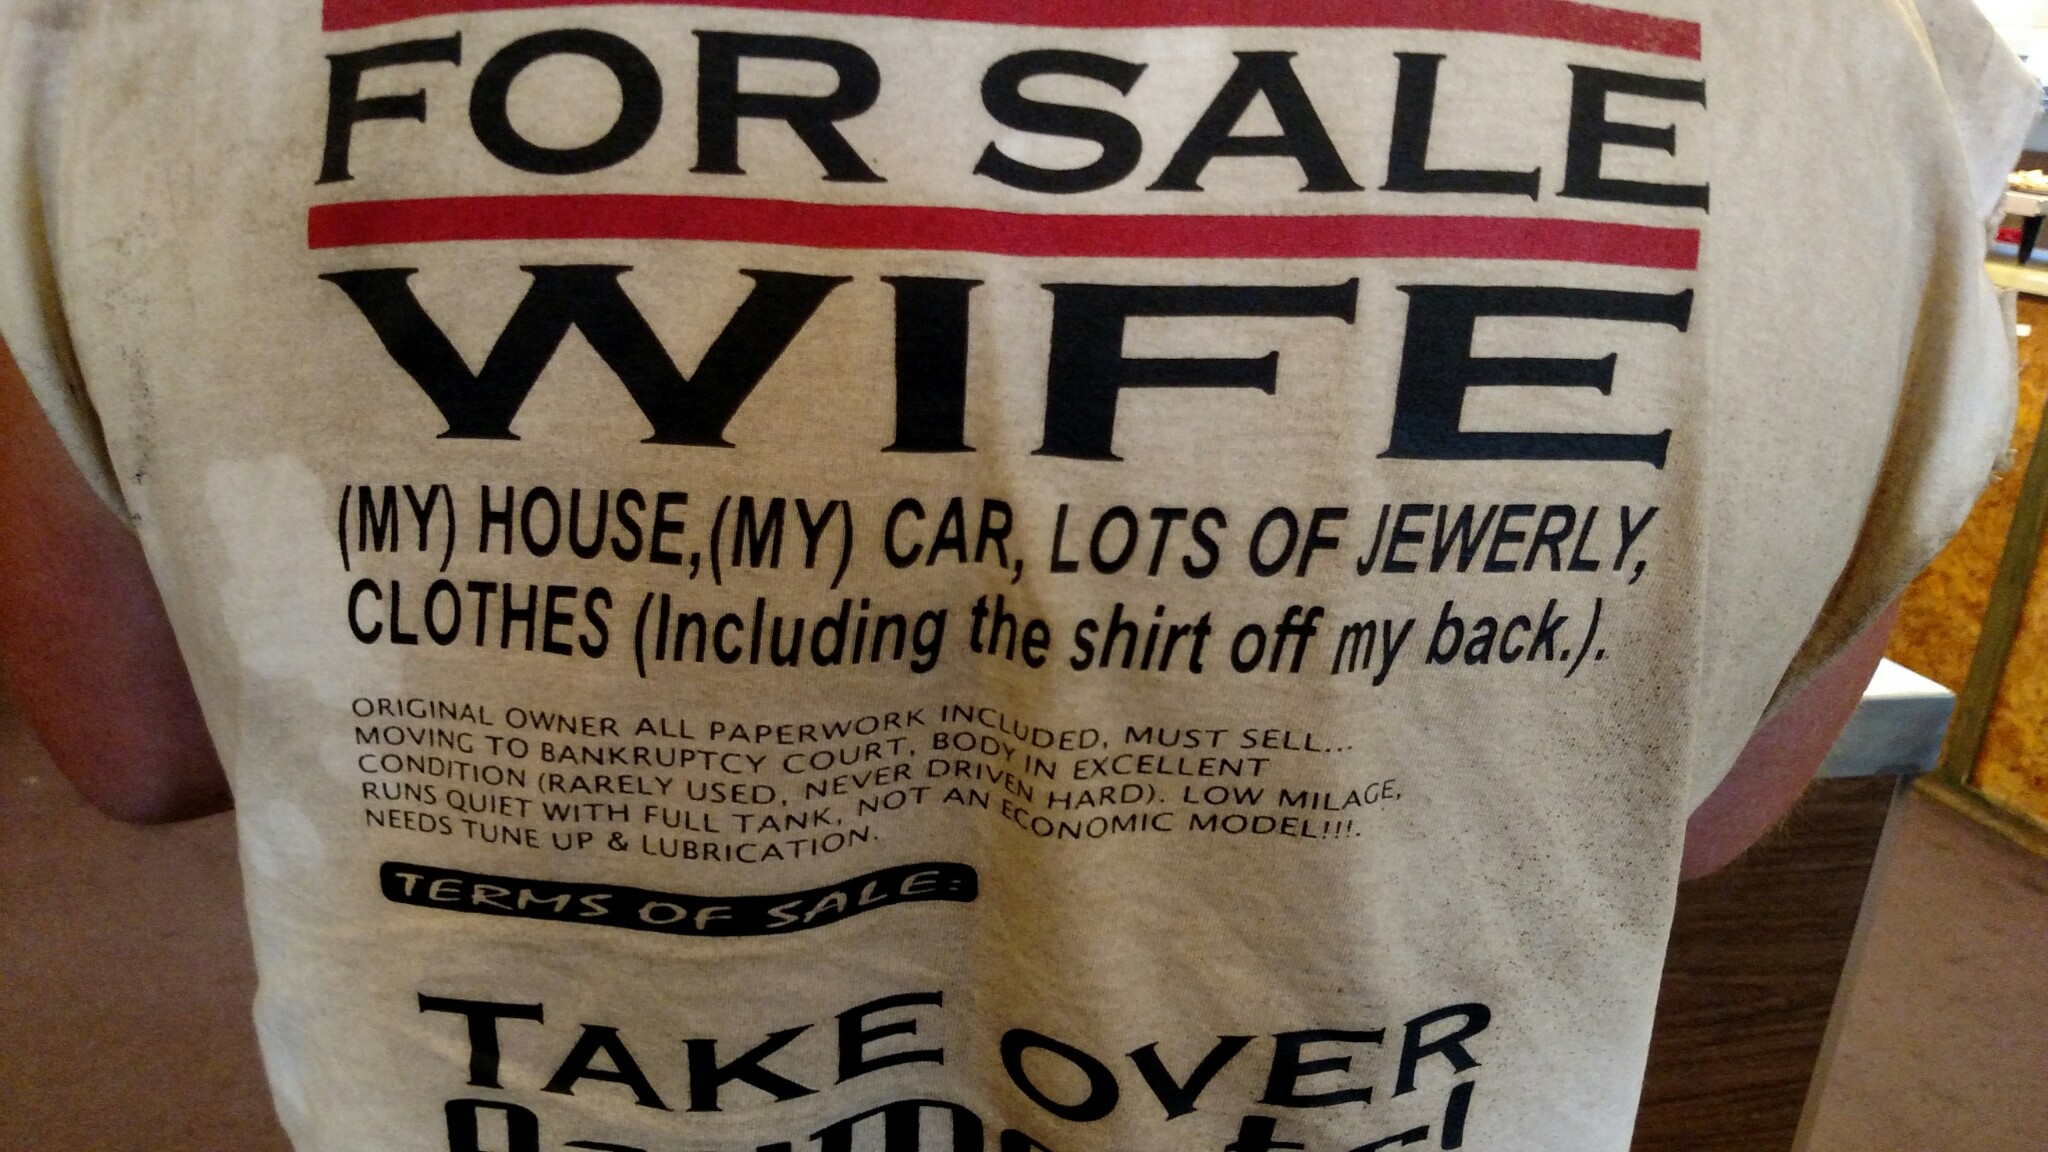 For Sale Wife.jpg